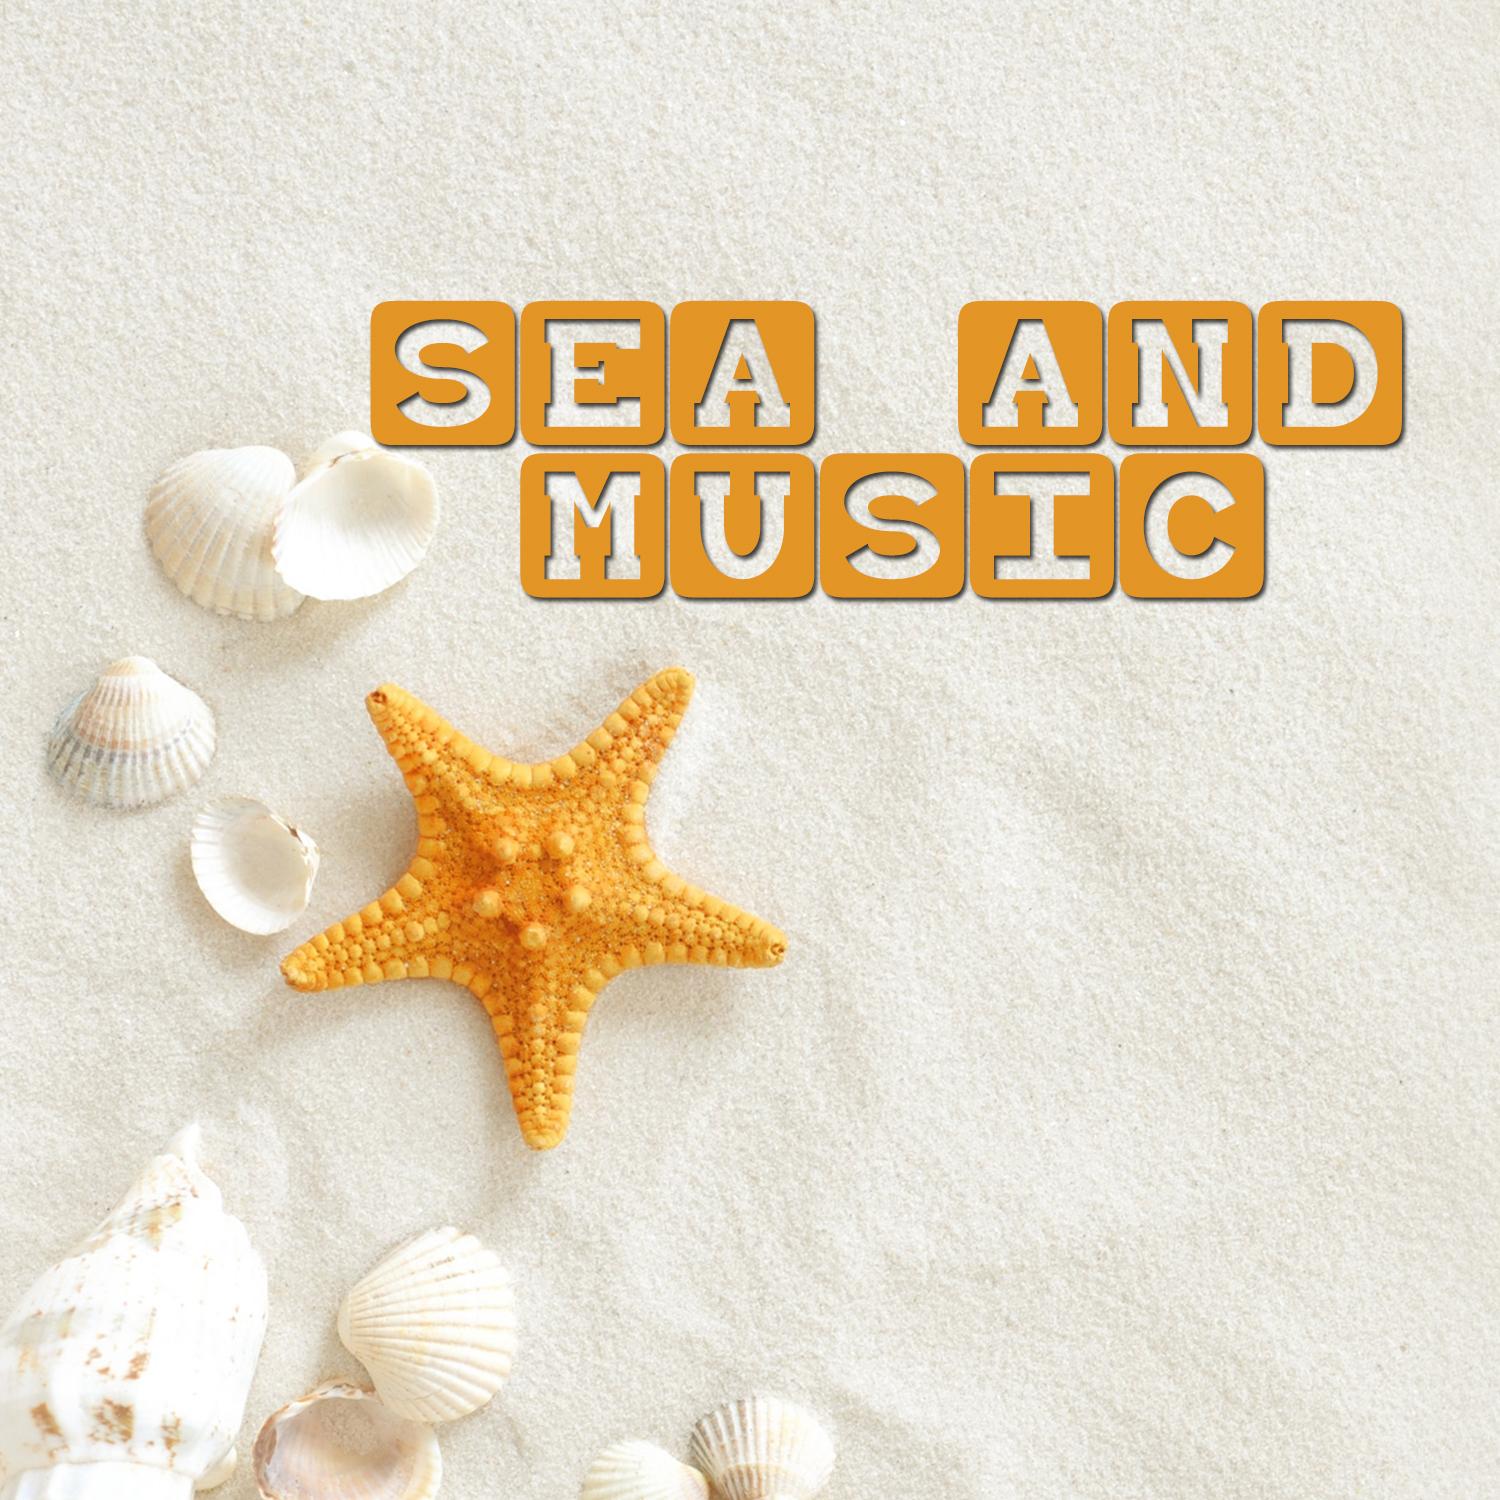 Sea and Music